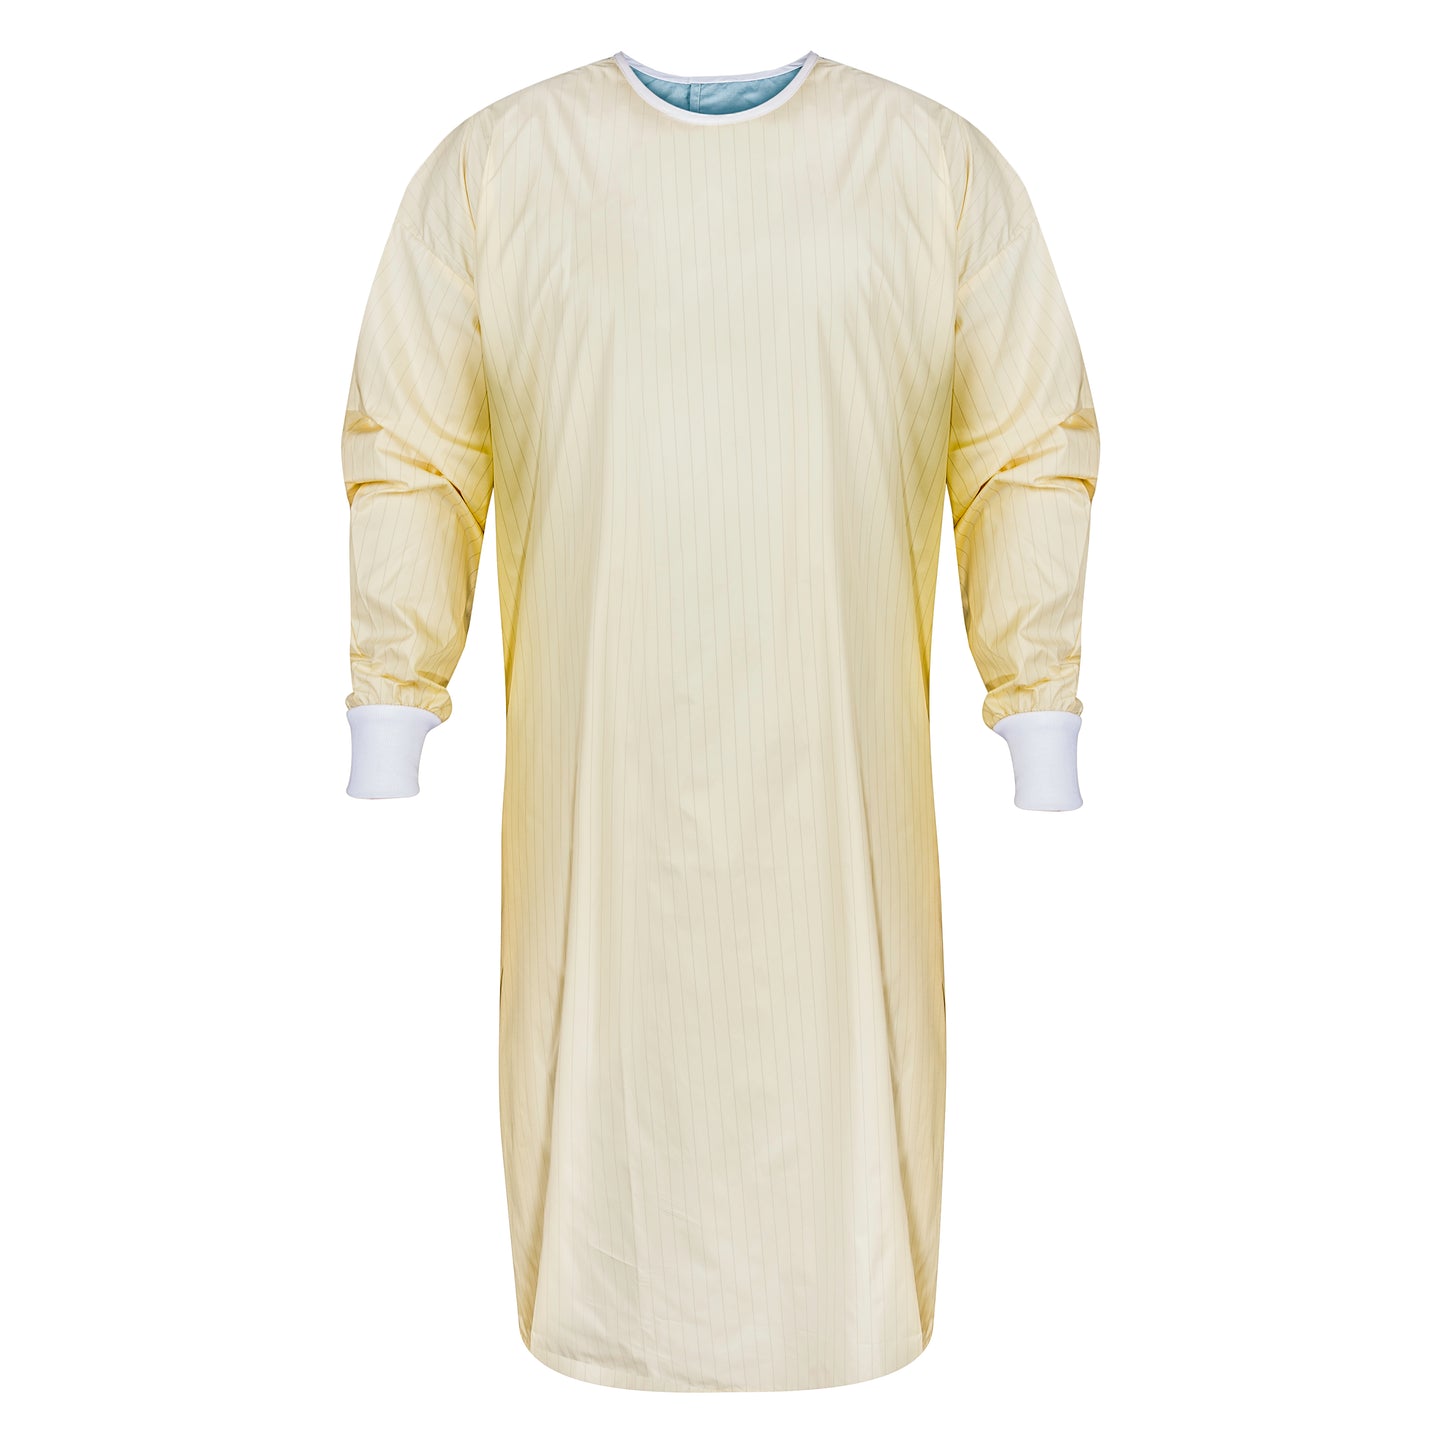 Protective Gown, Set in Sleeve, Knit Cuffs, Yellow w/ Blue Back, 75 Check Grid, Open Back